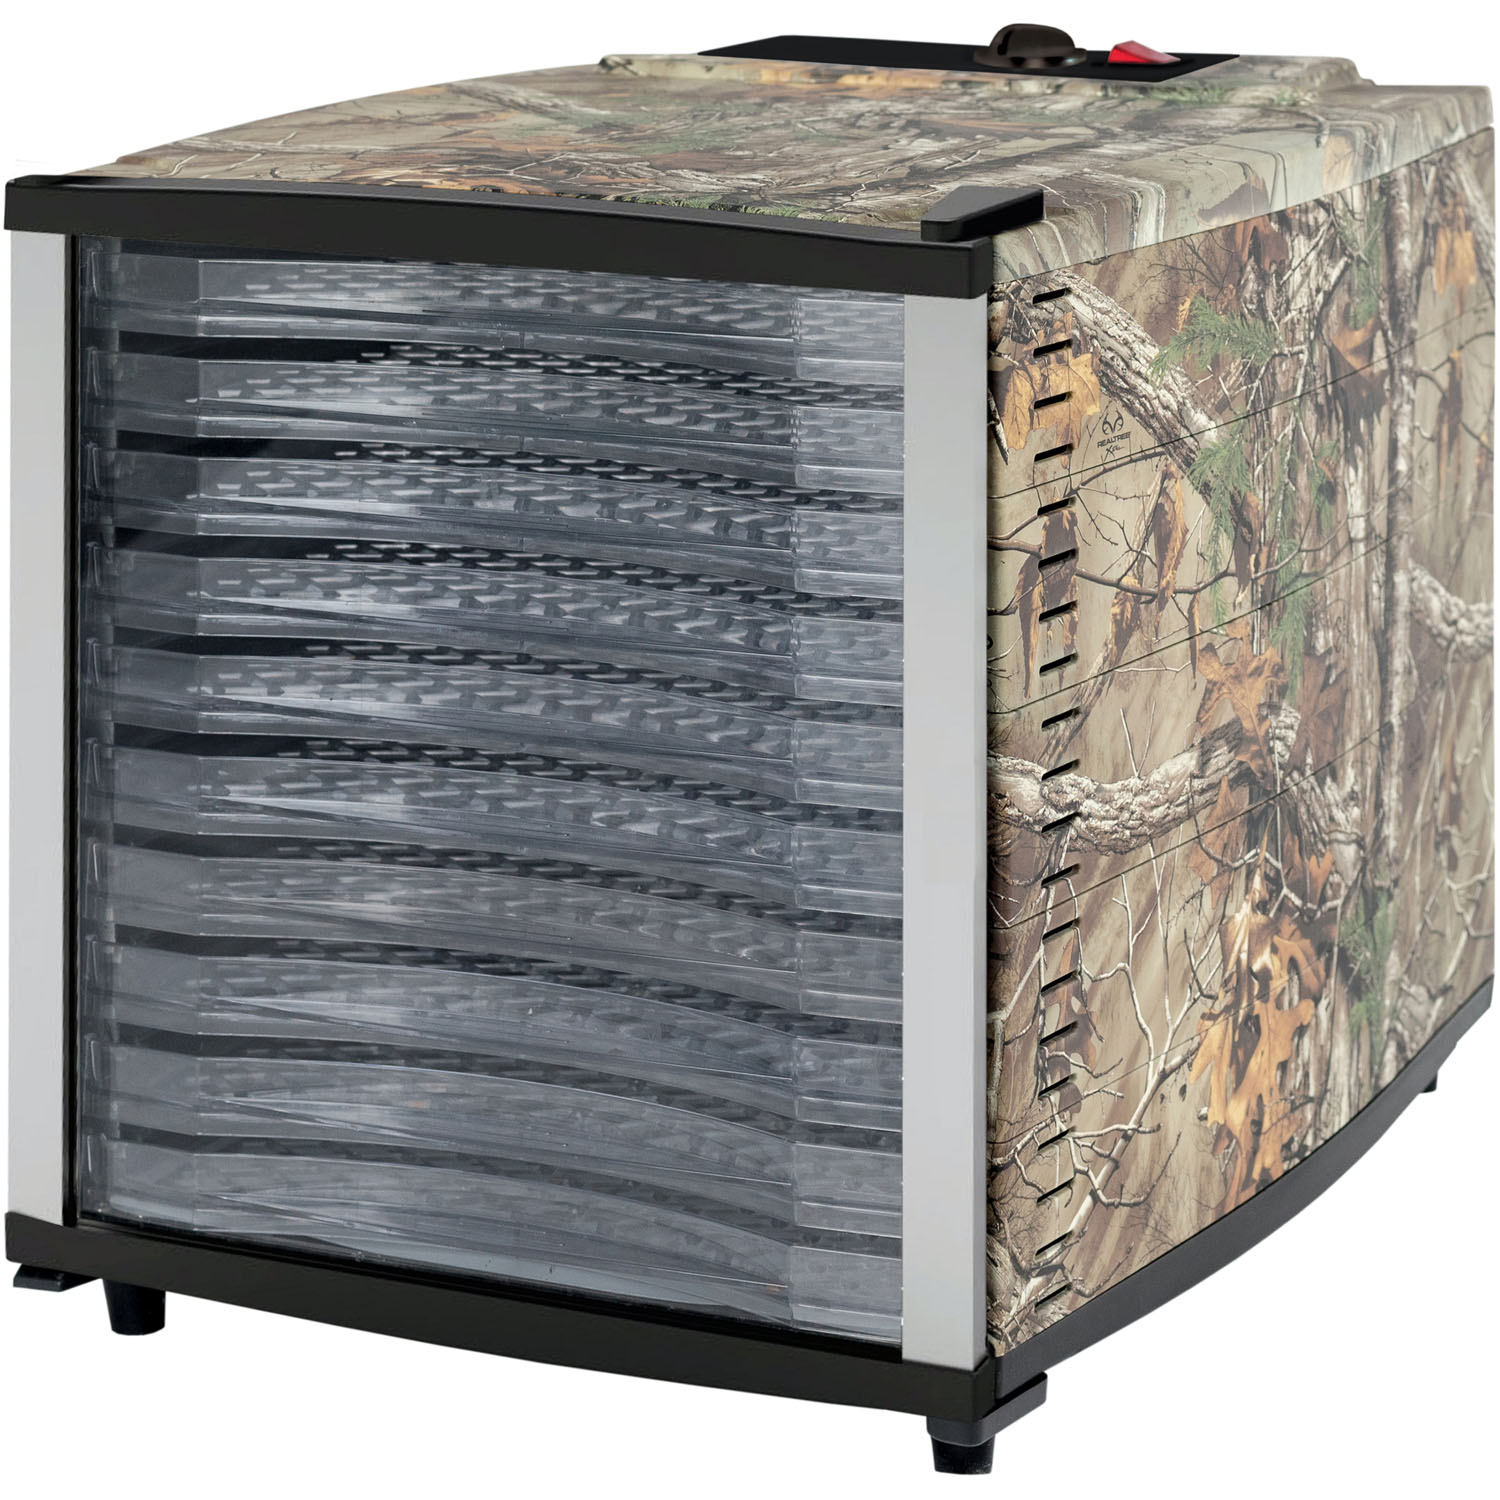 Magic Chef 10-Tray Food Dehydrator with Authentic Realtree Xtra Camouflage Pattern - image 1 of 5